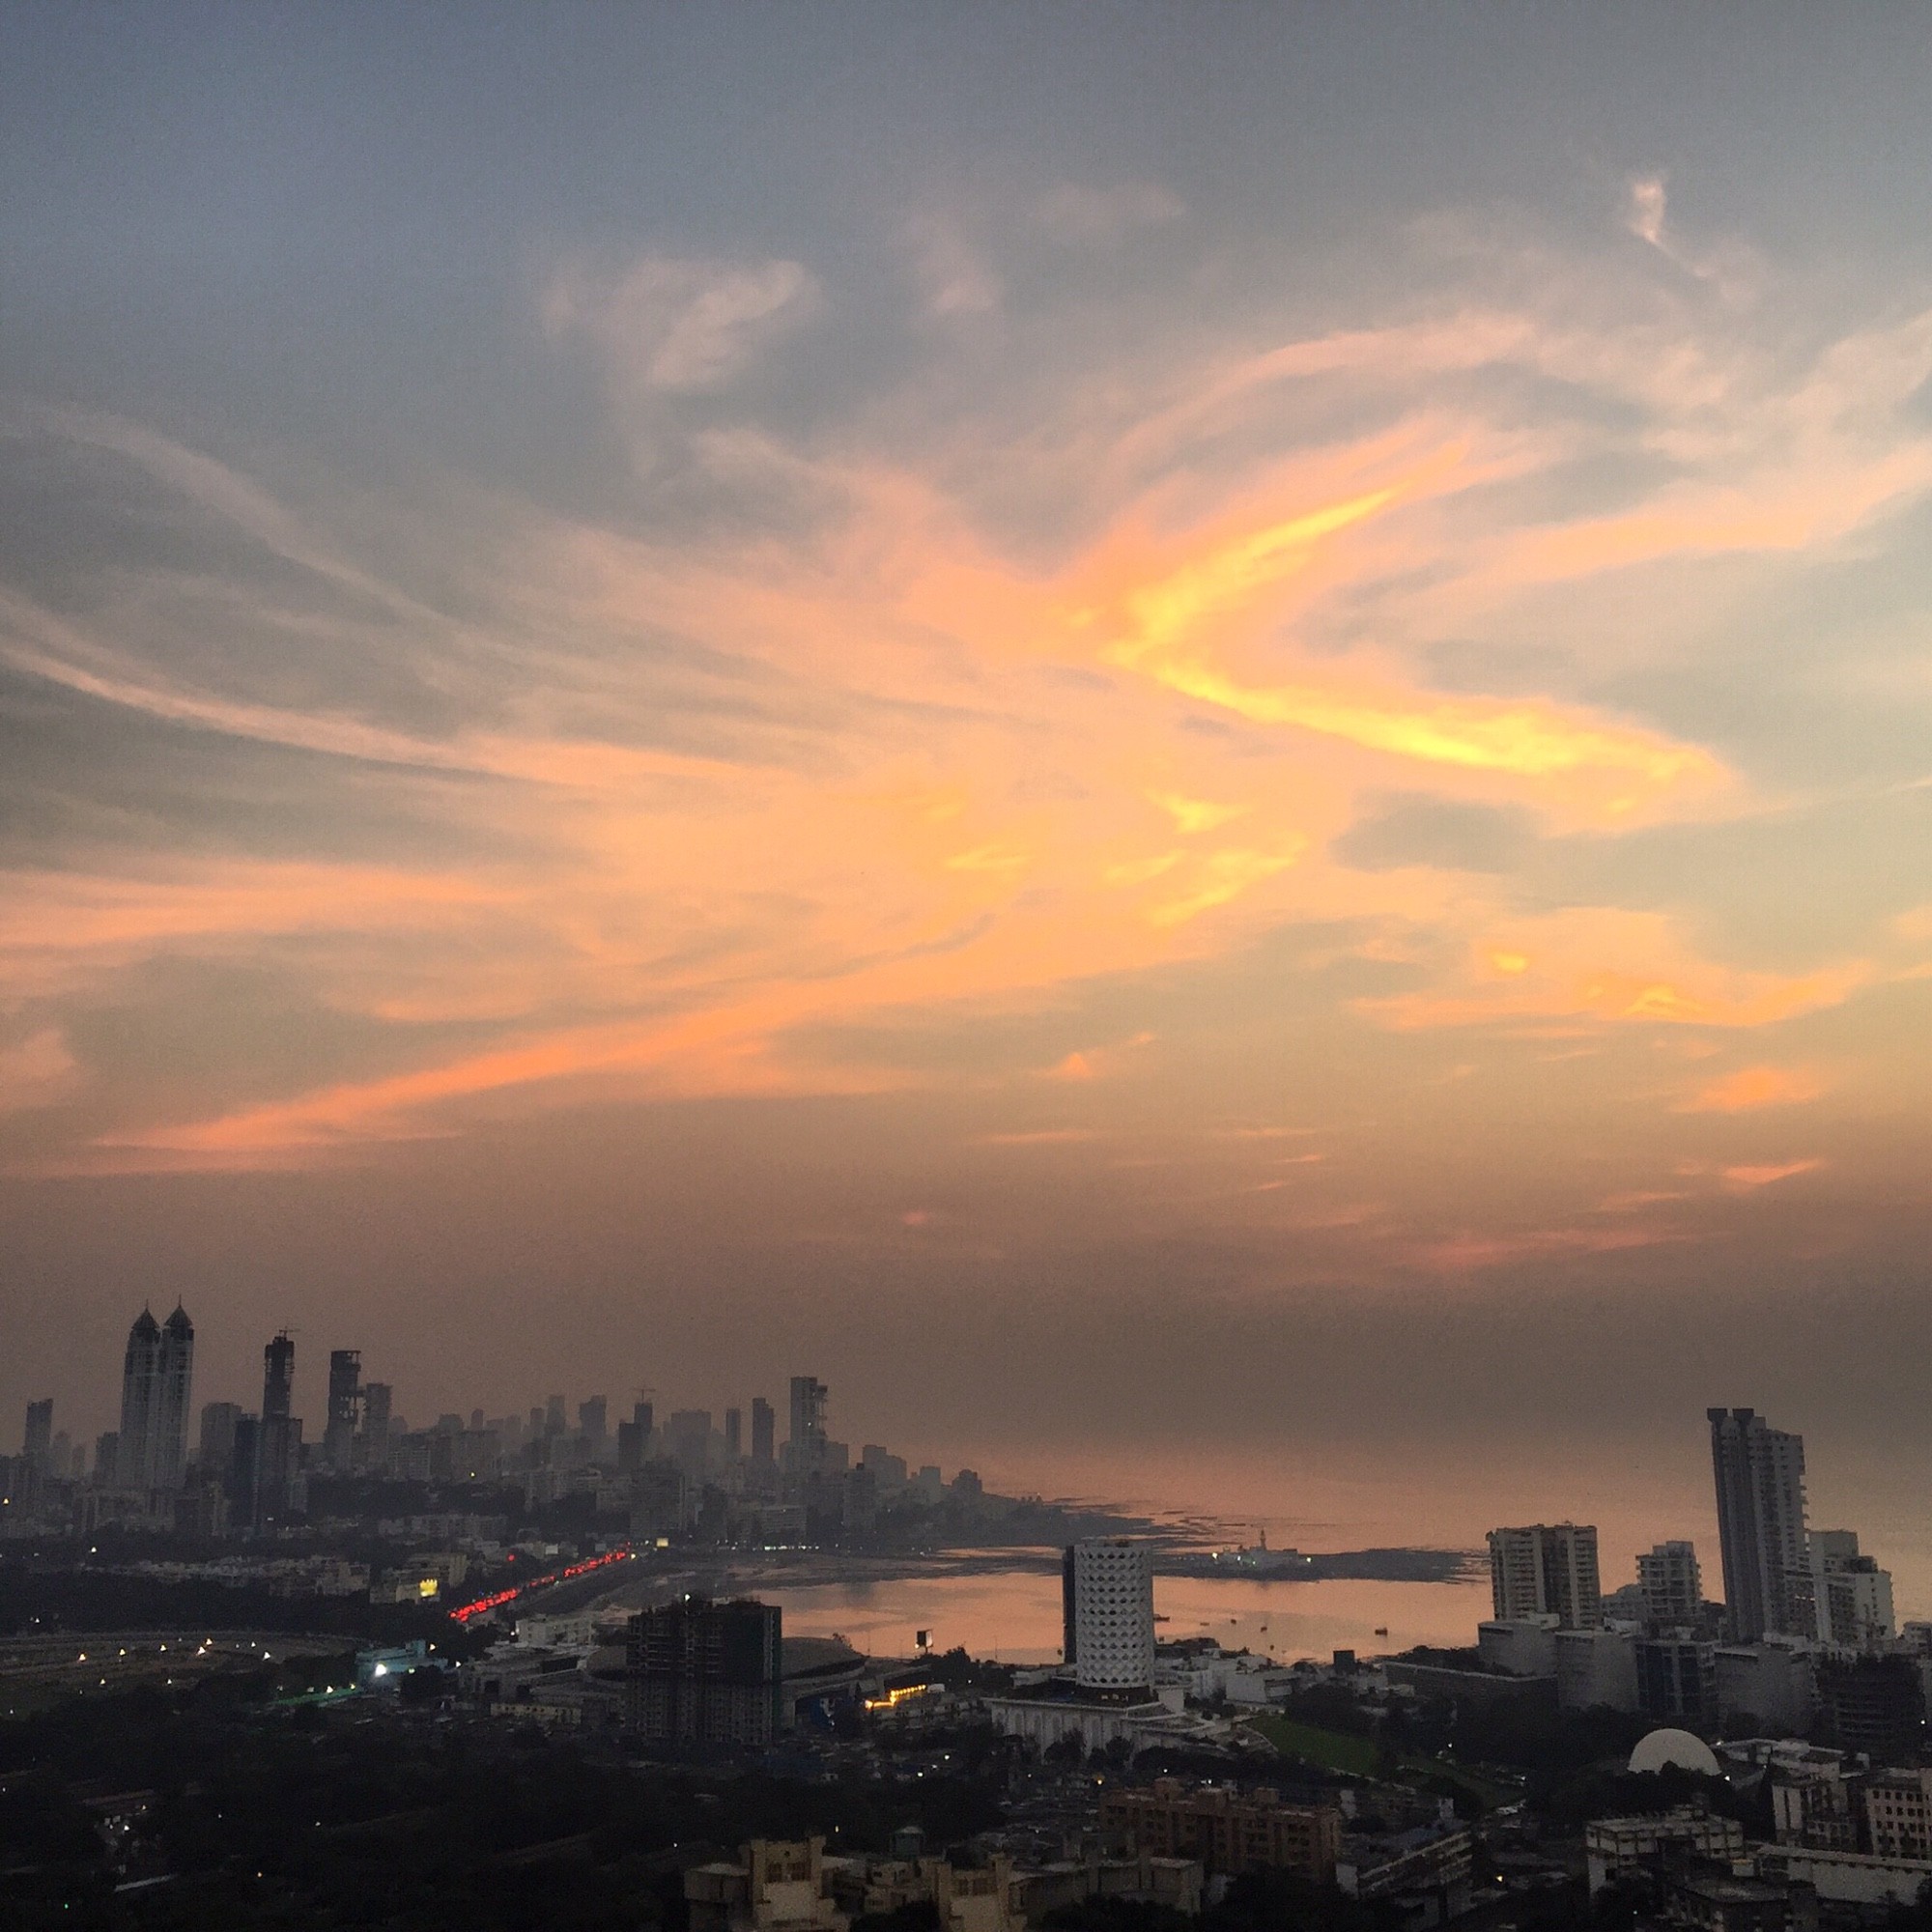 Wonderful sunset in South Mumbai. View from the roof of Four Seasons Hotel